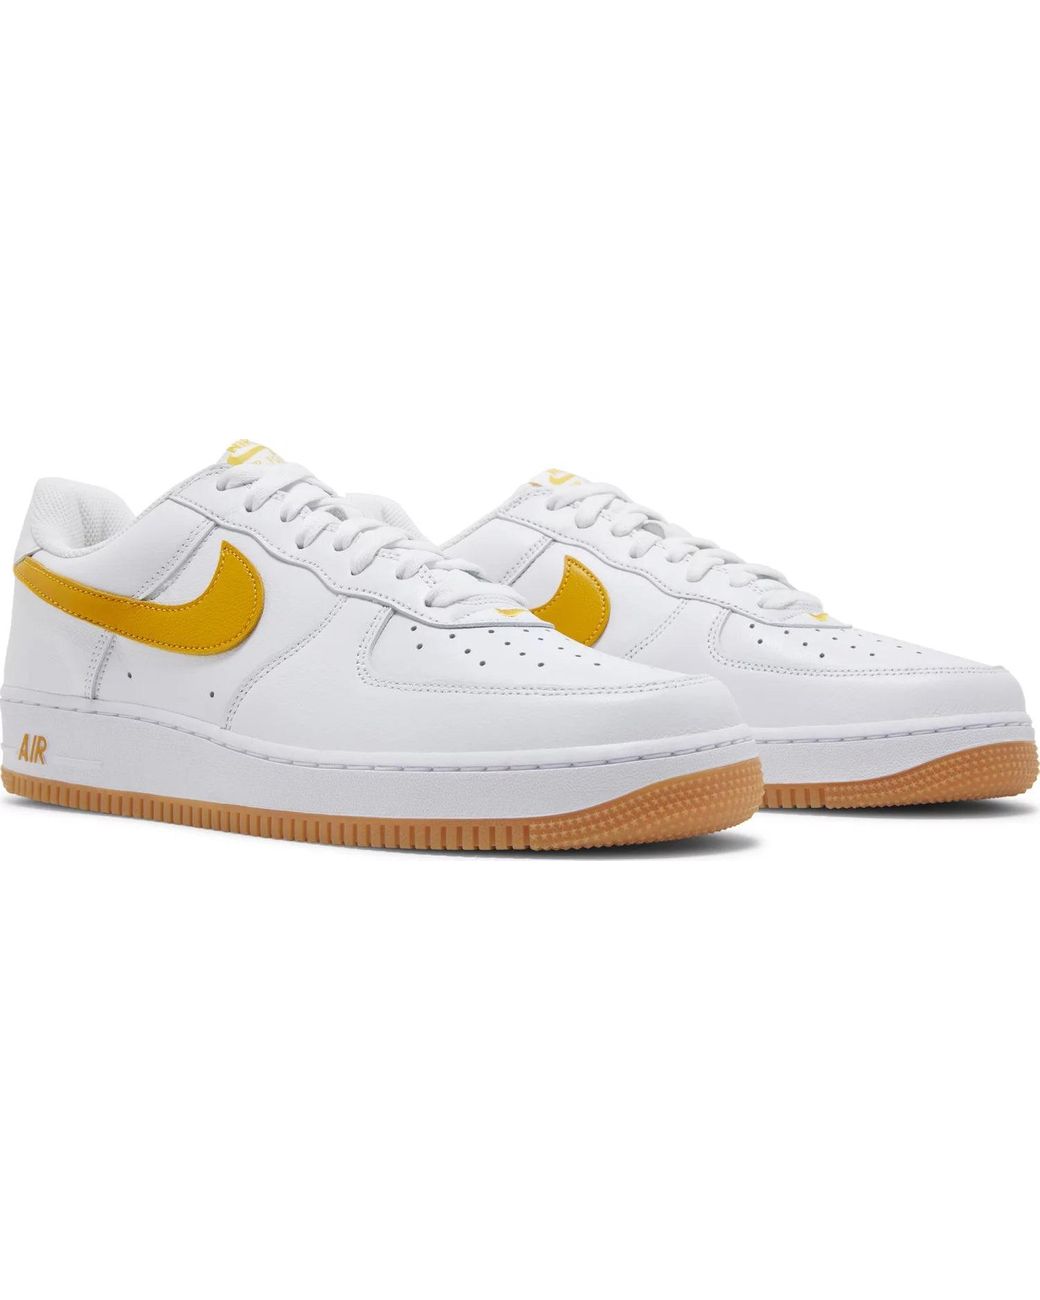 LOUIS VUITTON NIKE AIR FORCE 1 LOW GOLD - The Edit LDN